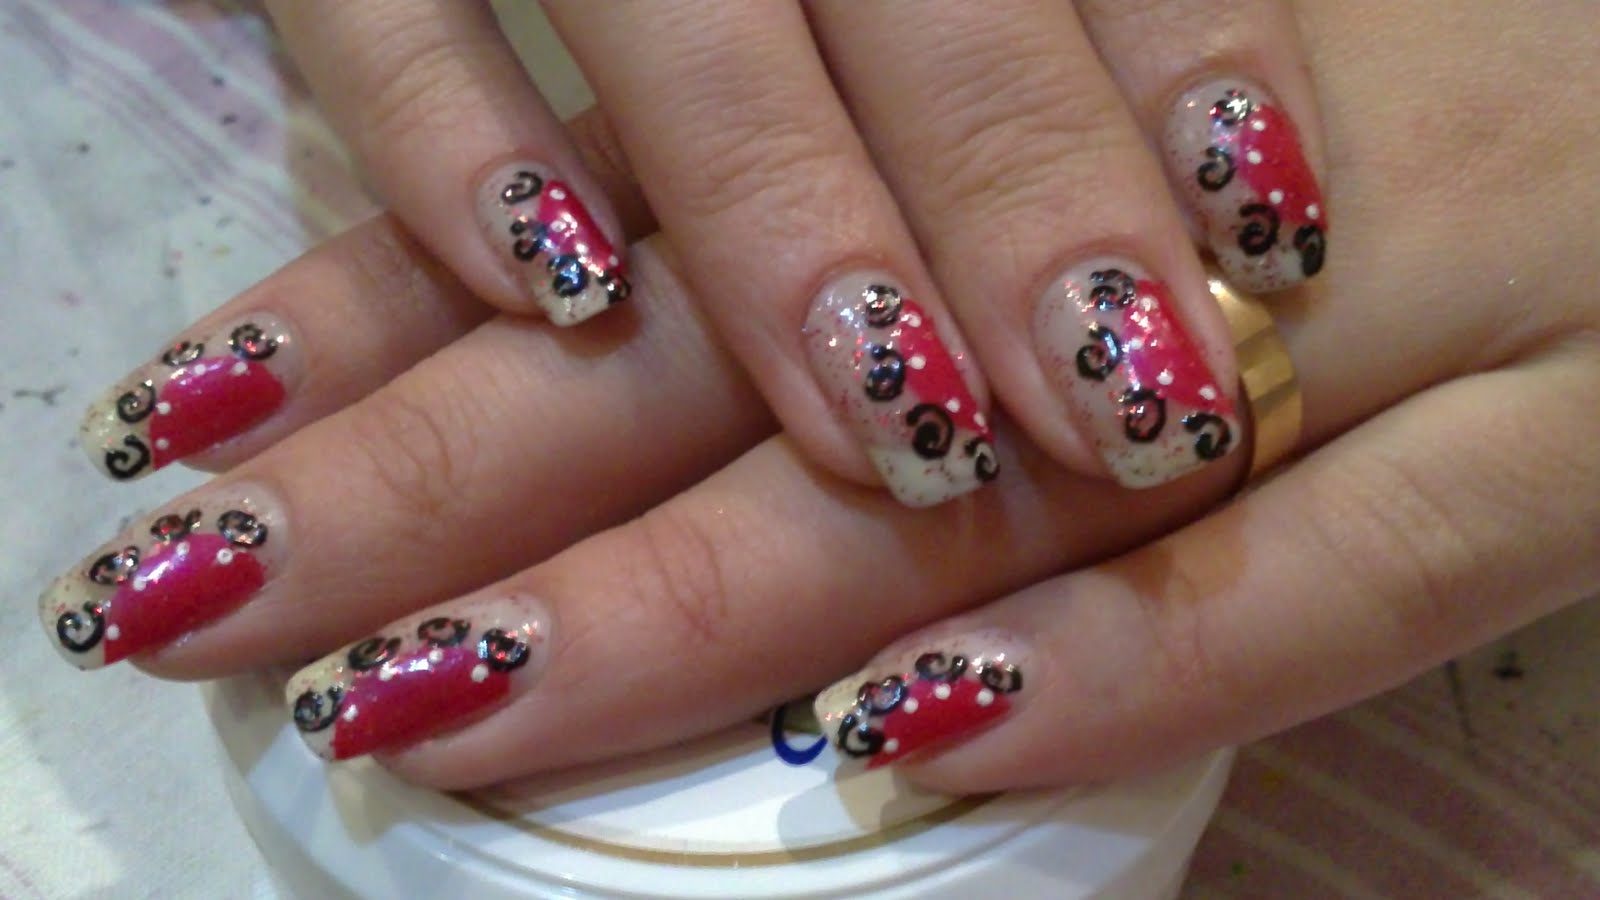 2. Easy Hand Nail Art - wide 10